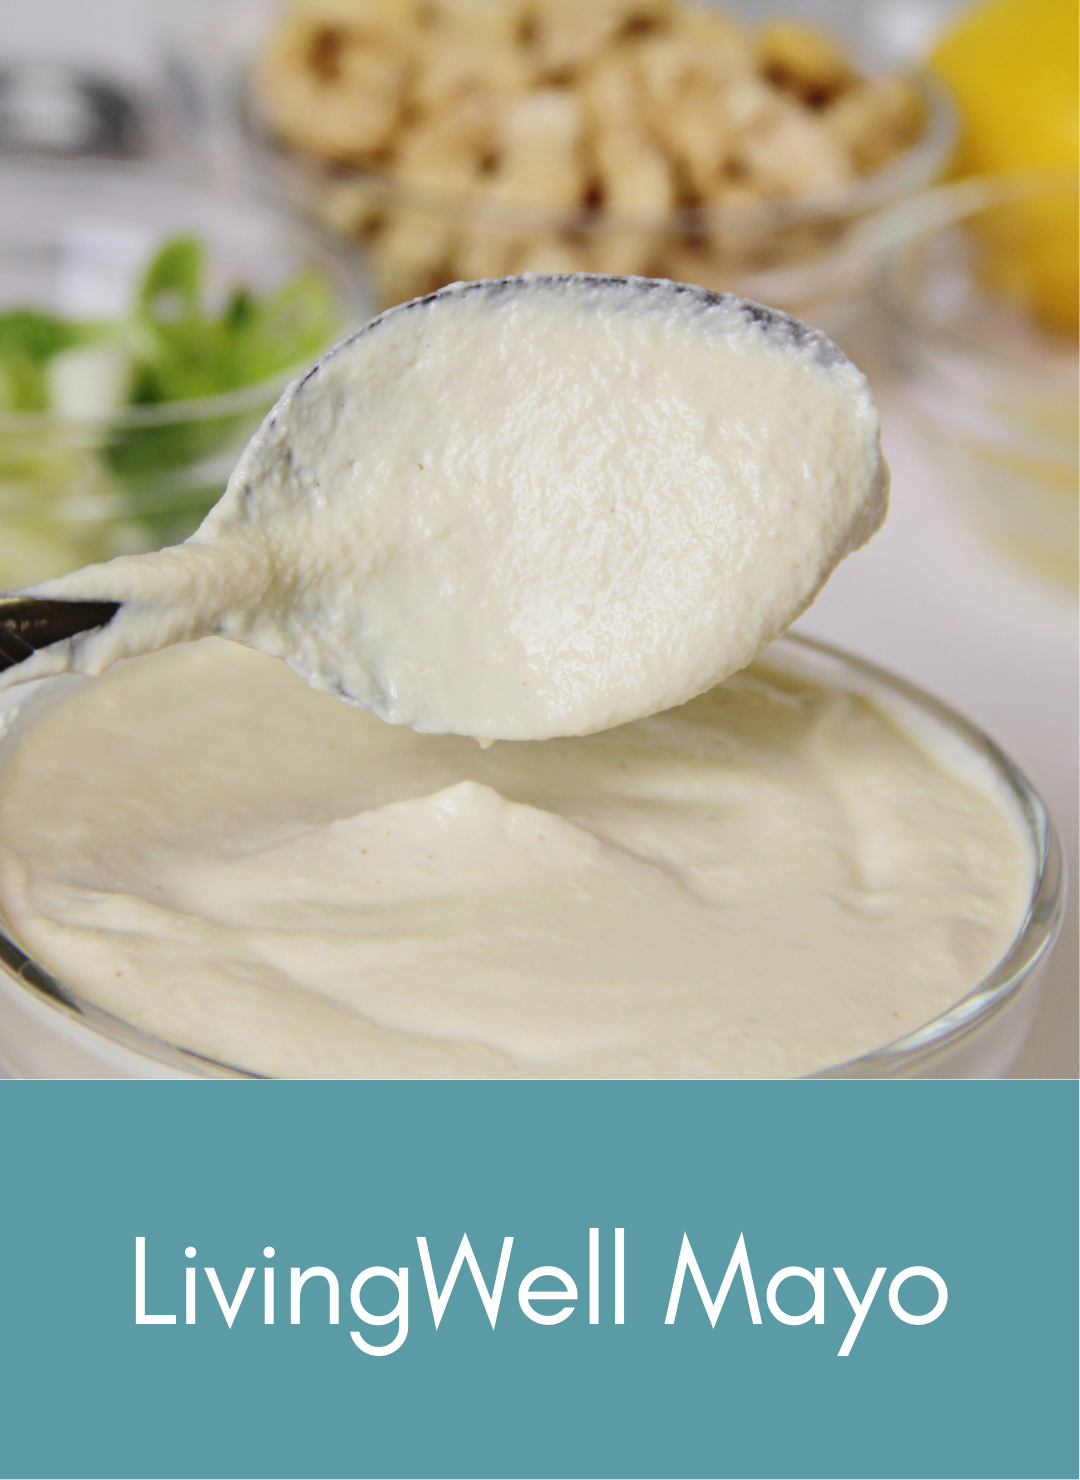 Plant based whole food vegan mayo Picture with link to recipe